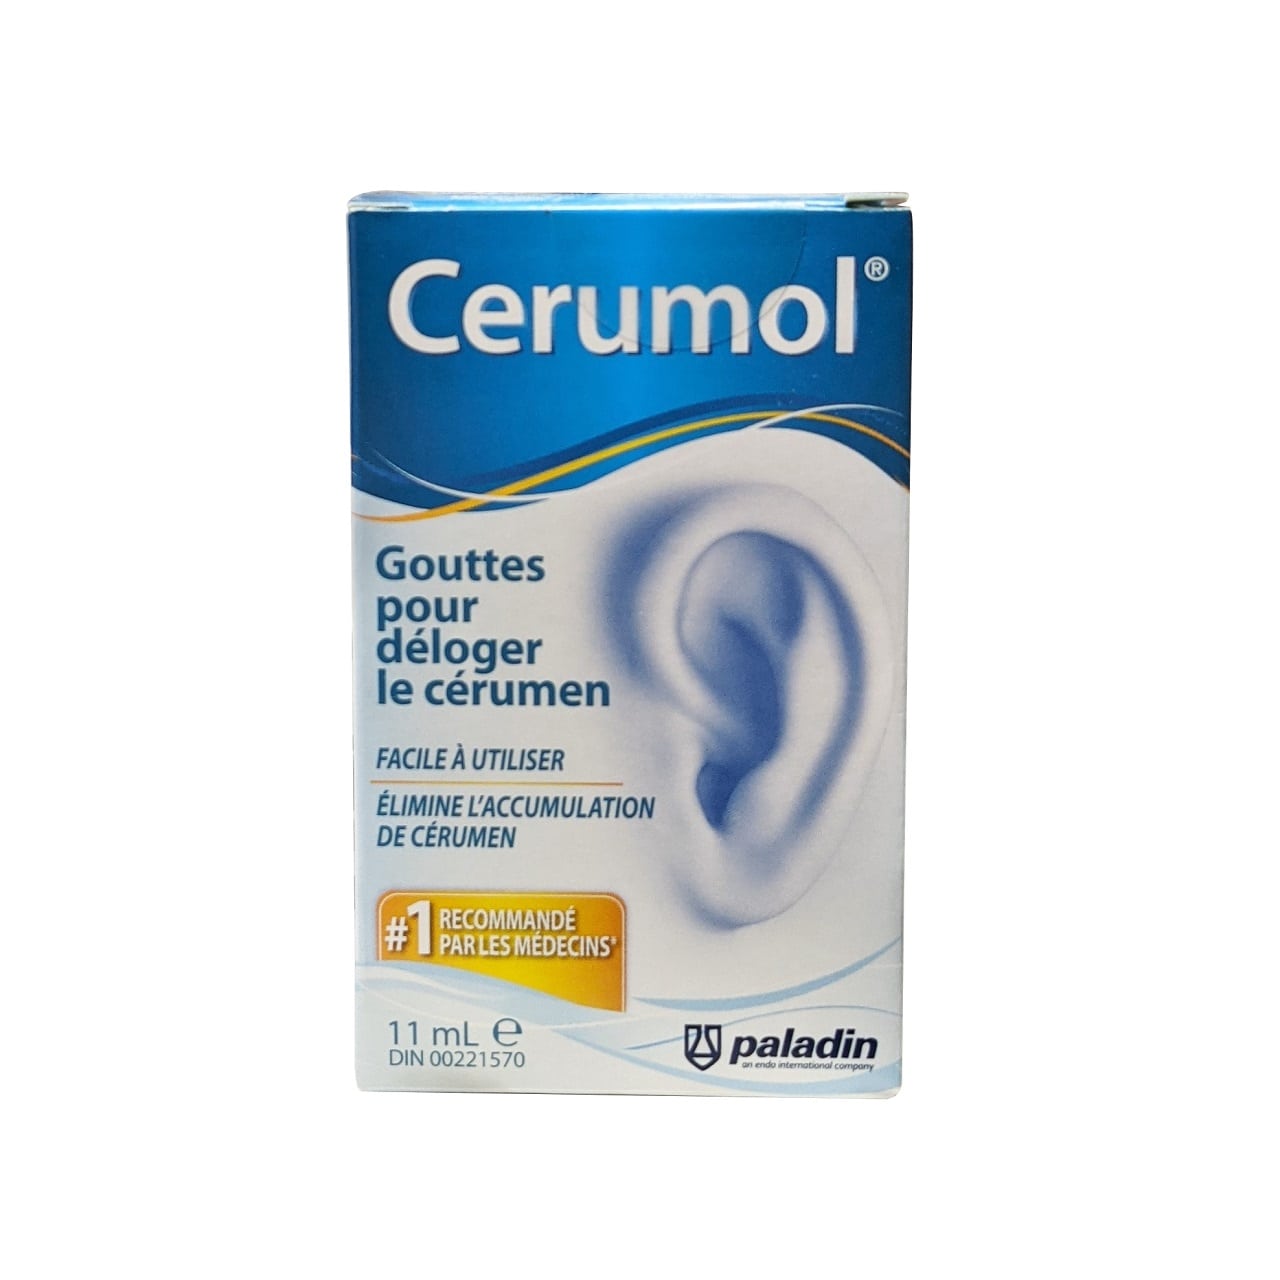 Product label for Cerumol Ear Wax Removal Drops (11 mL) in French